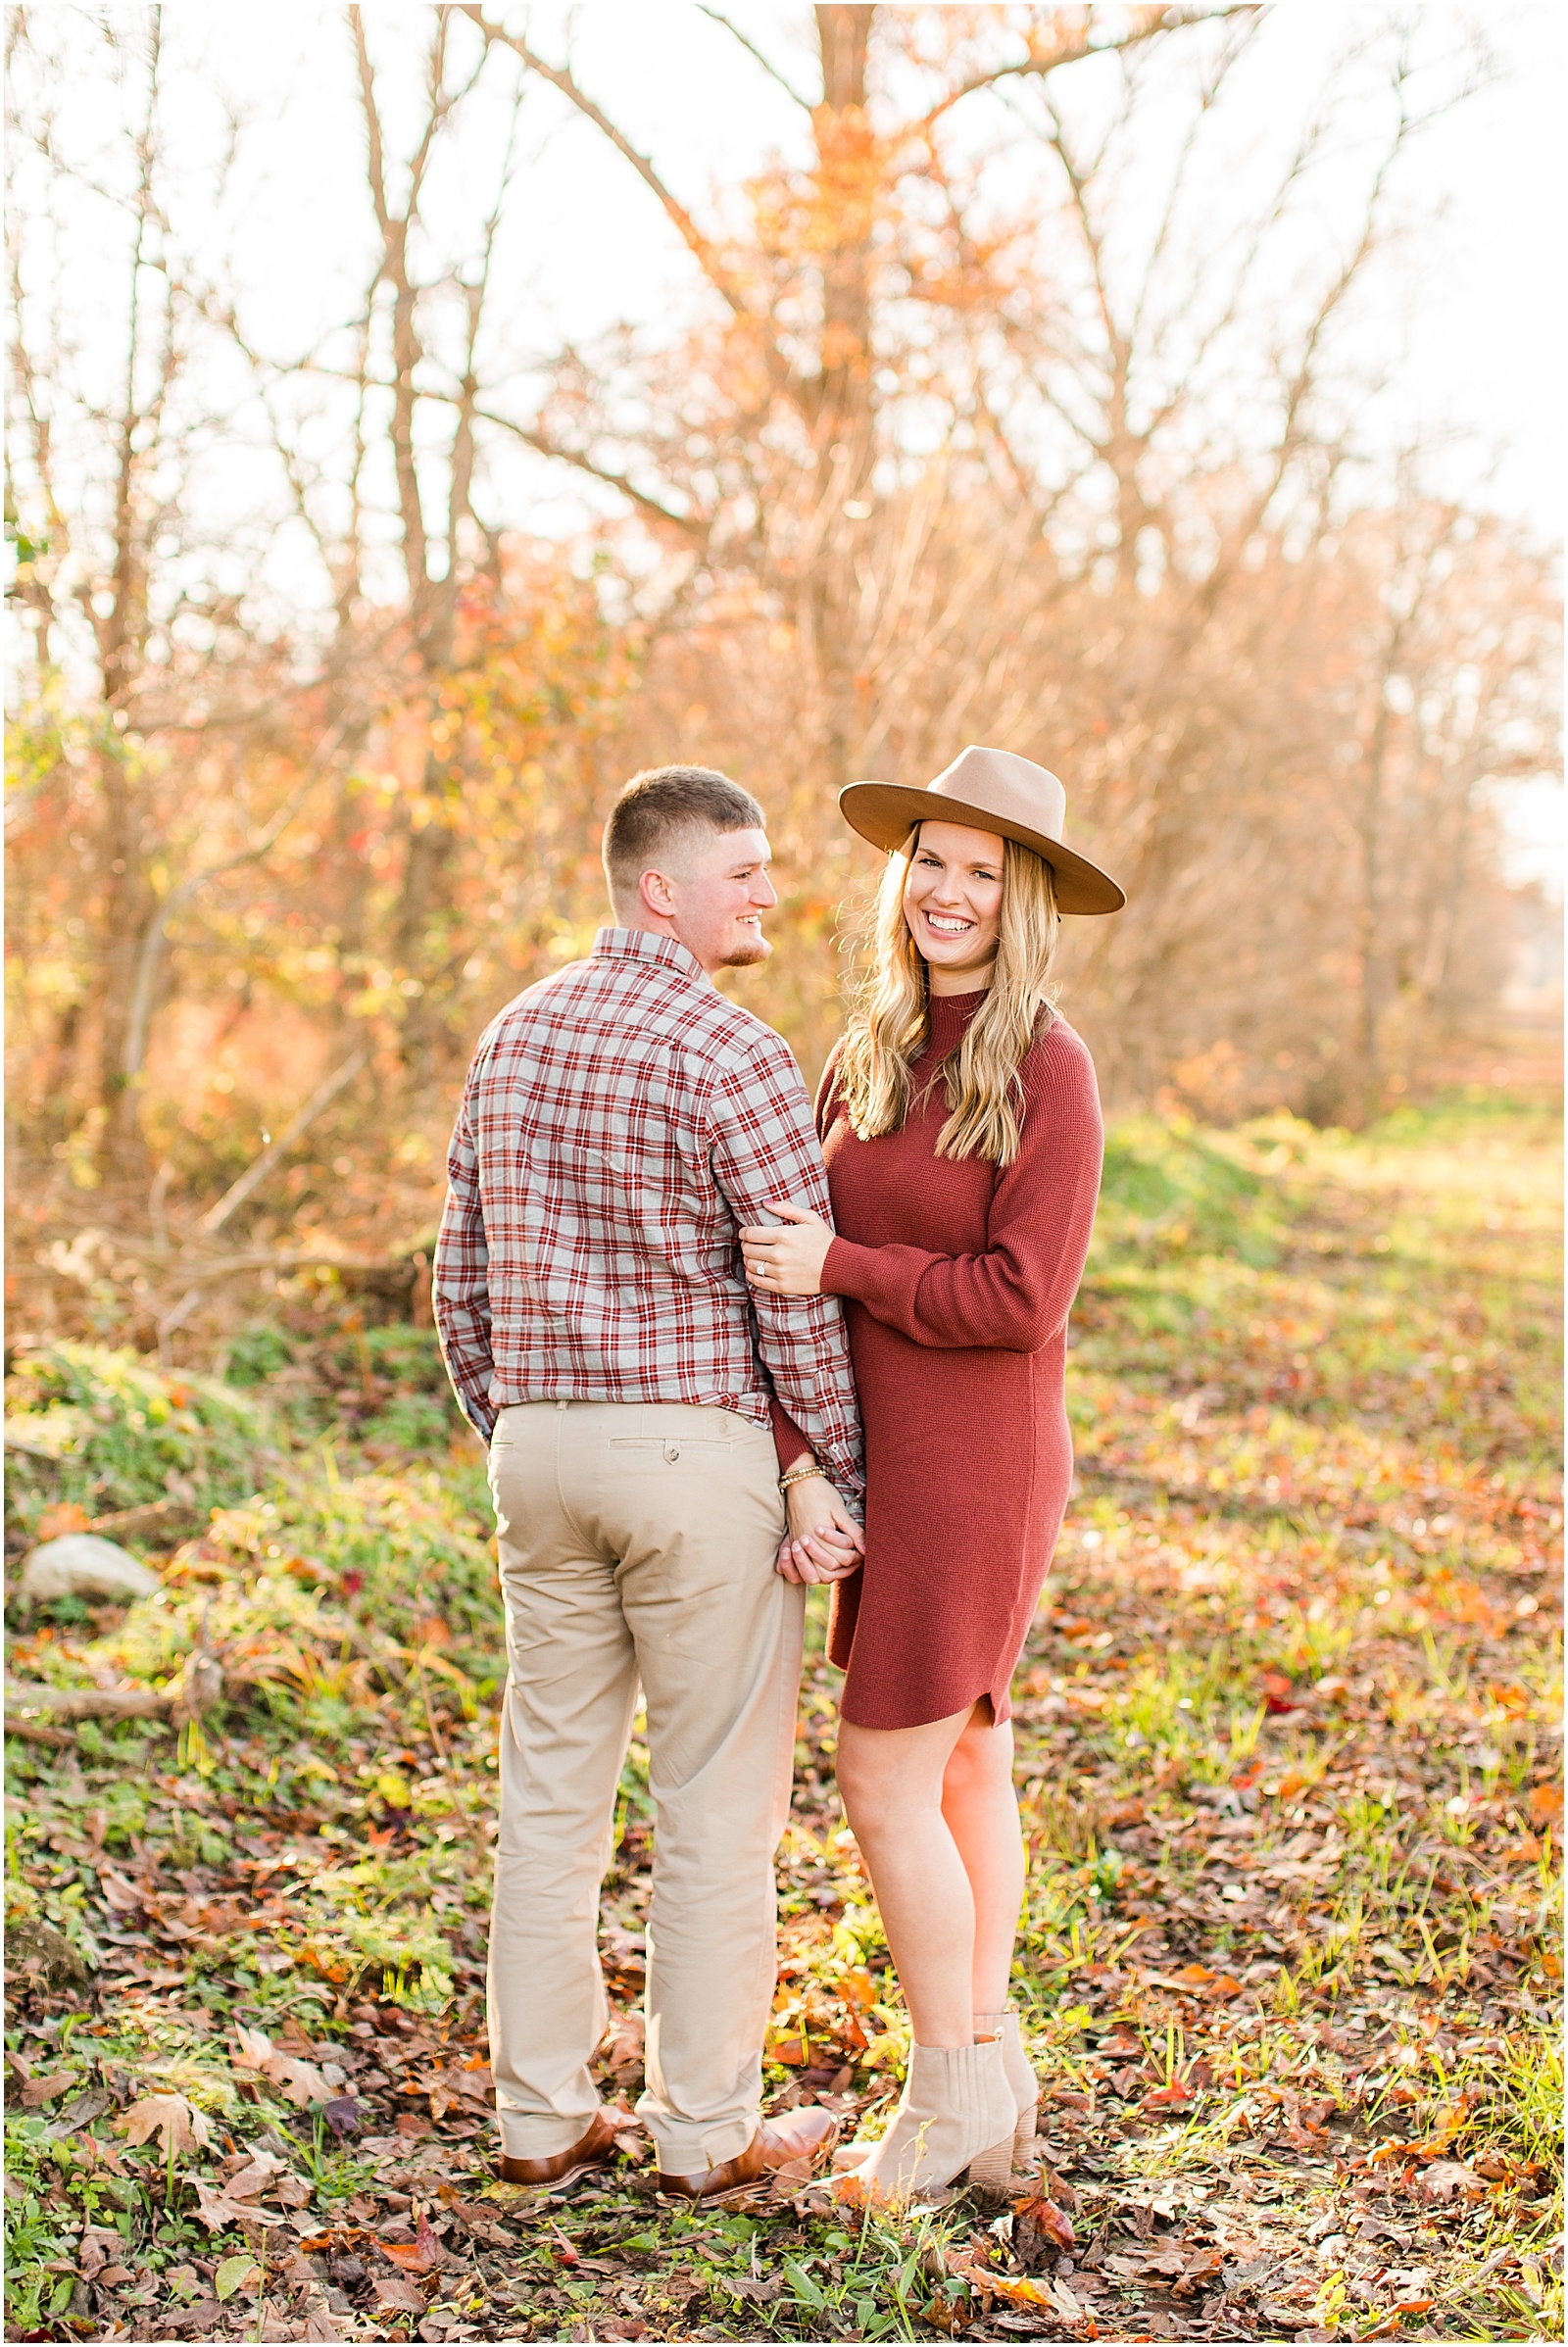 A Fall Southern Indiana Engagement Seesion | Cody and Hannah | Bret and Brandie Photography 018.jpg